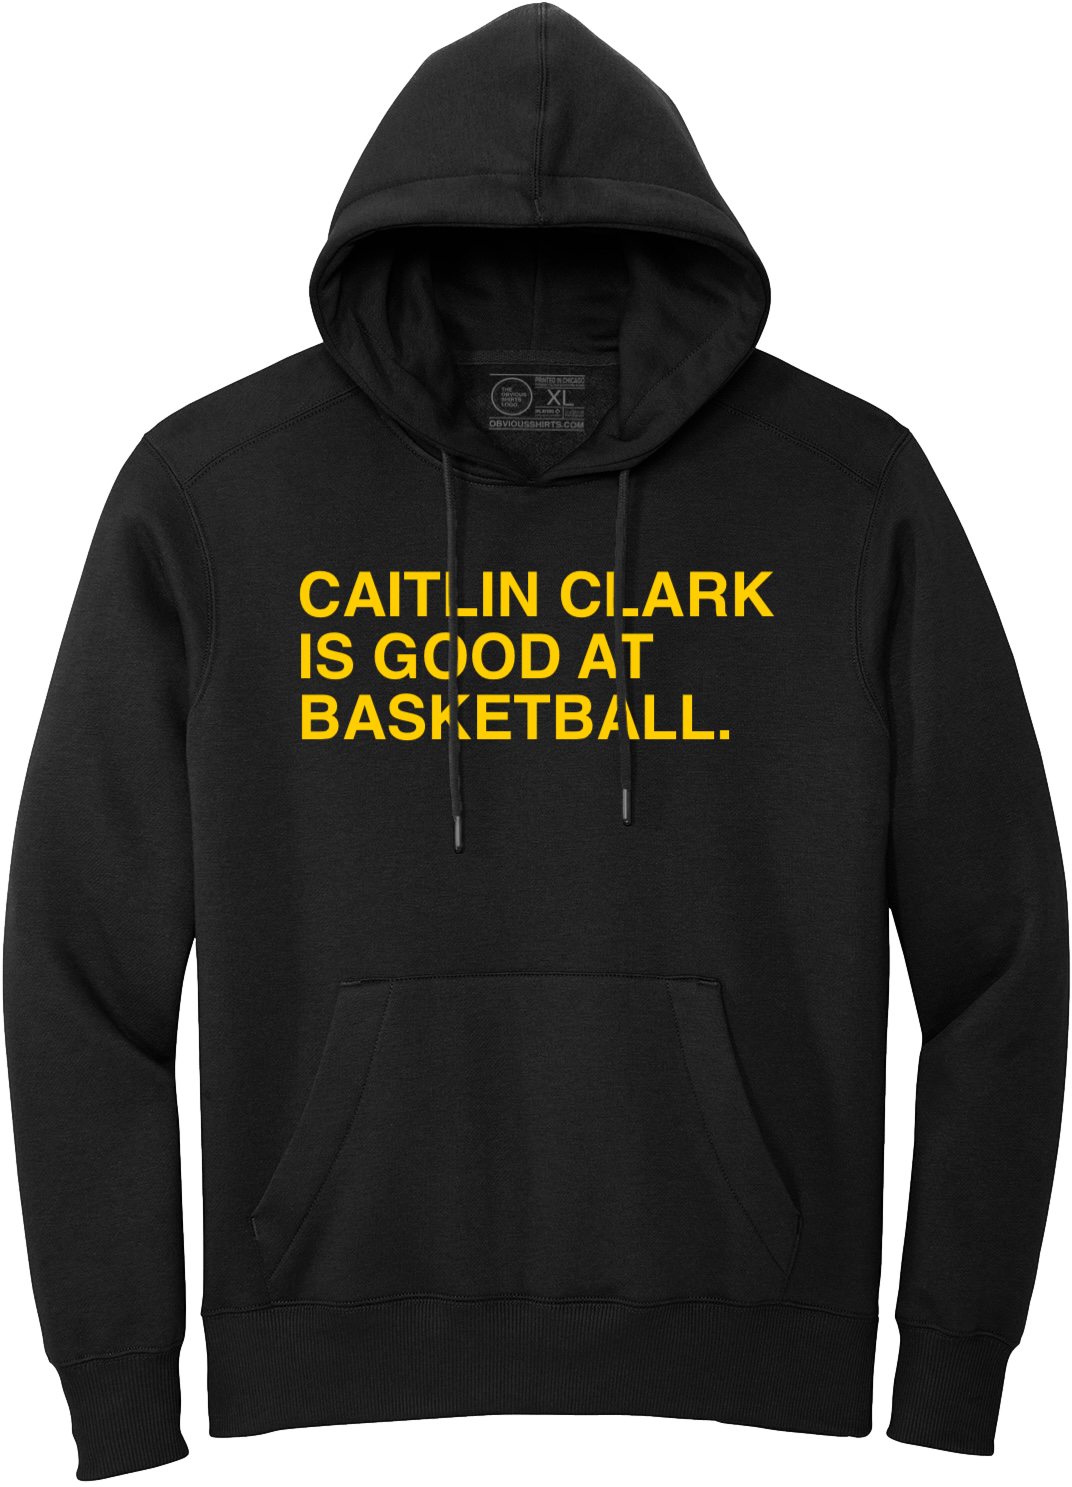 CAITLIN CLARK IS GOOD AT BASKETBALL. (HOODED SWEATSHIRT) - OBVIOUS SHIRTS